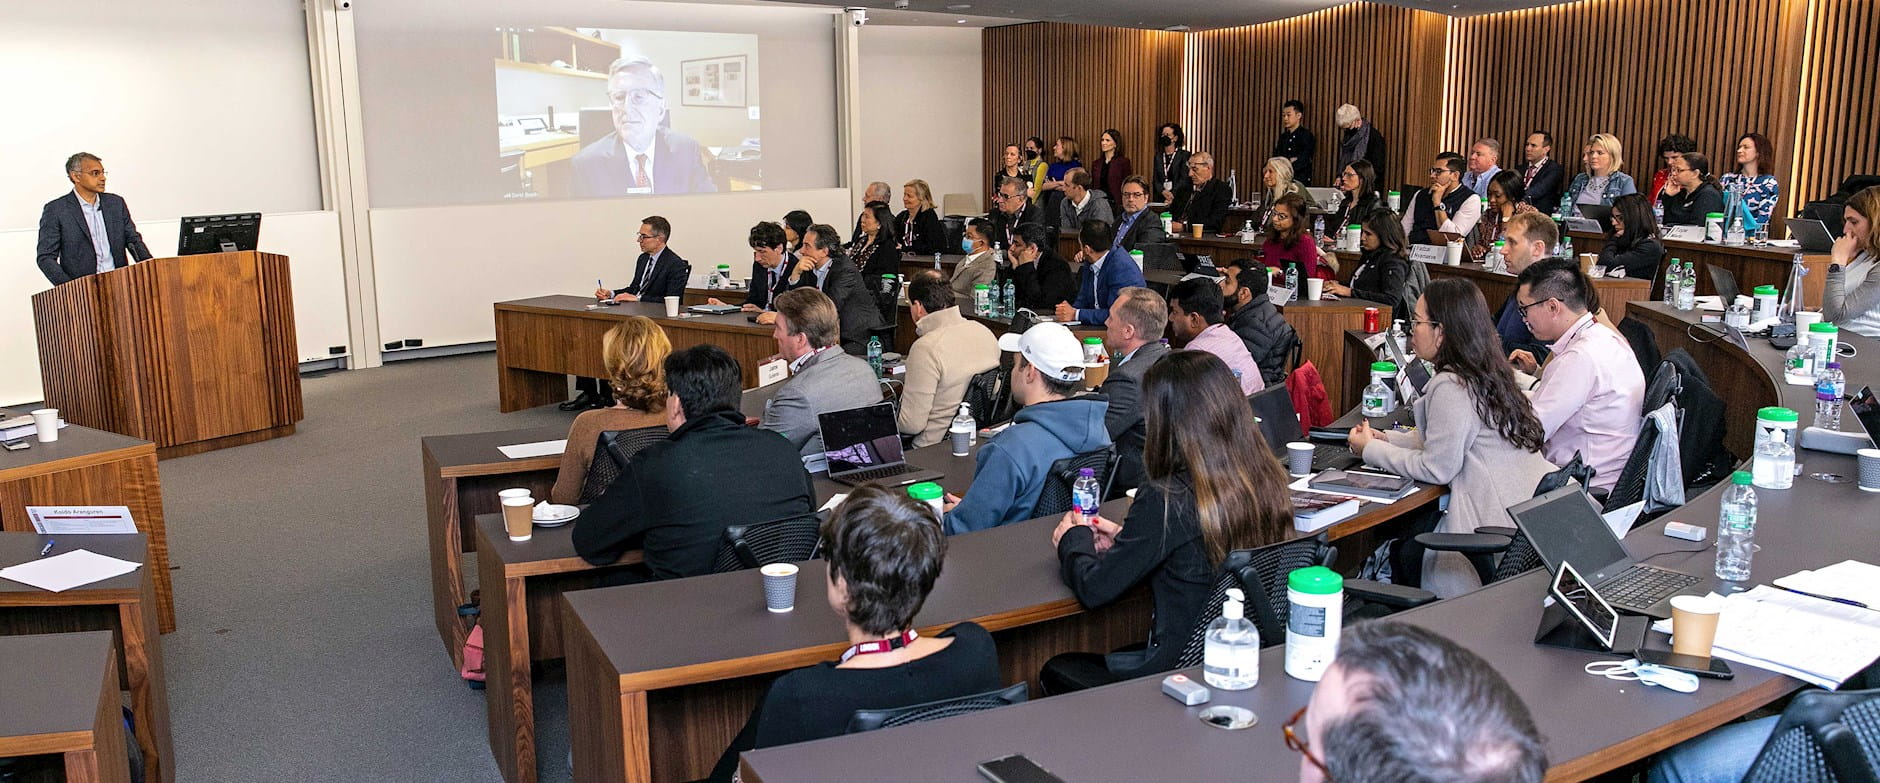 Madhav Rajan speaks at the podium of a London Campus classroom during the London Grand Opening